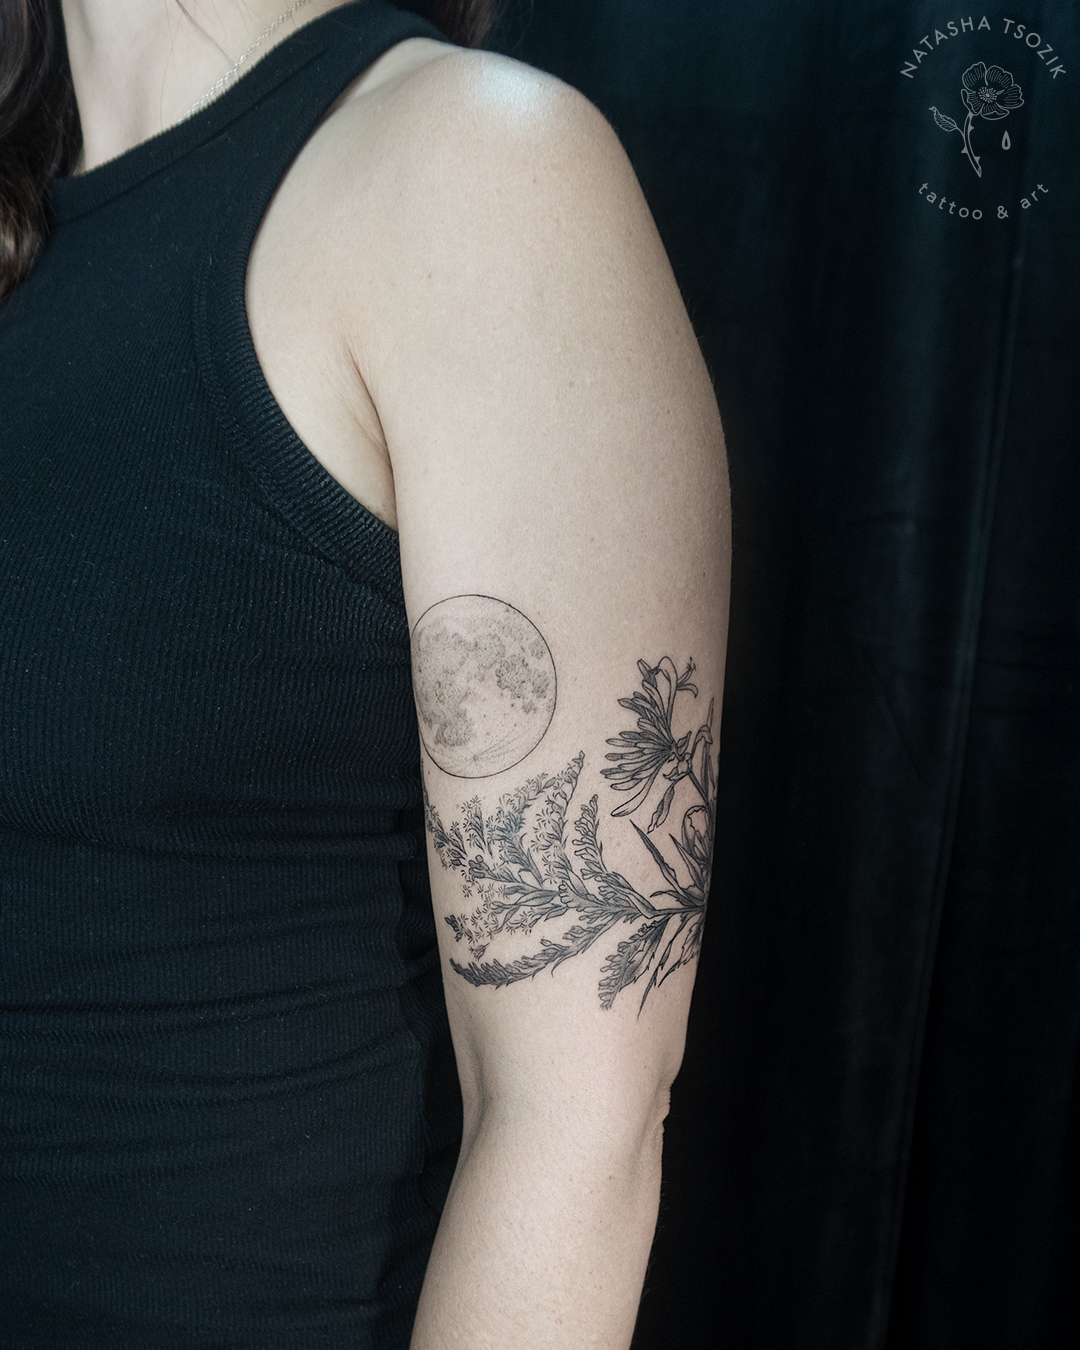 Botanical tattoo on a bicep: moon above a floral piece.